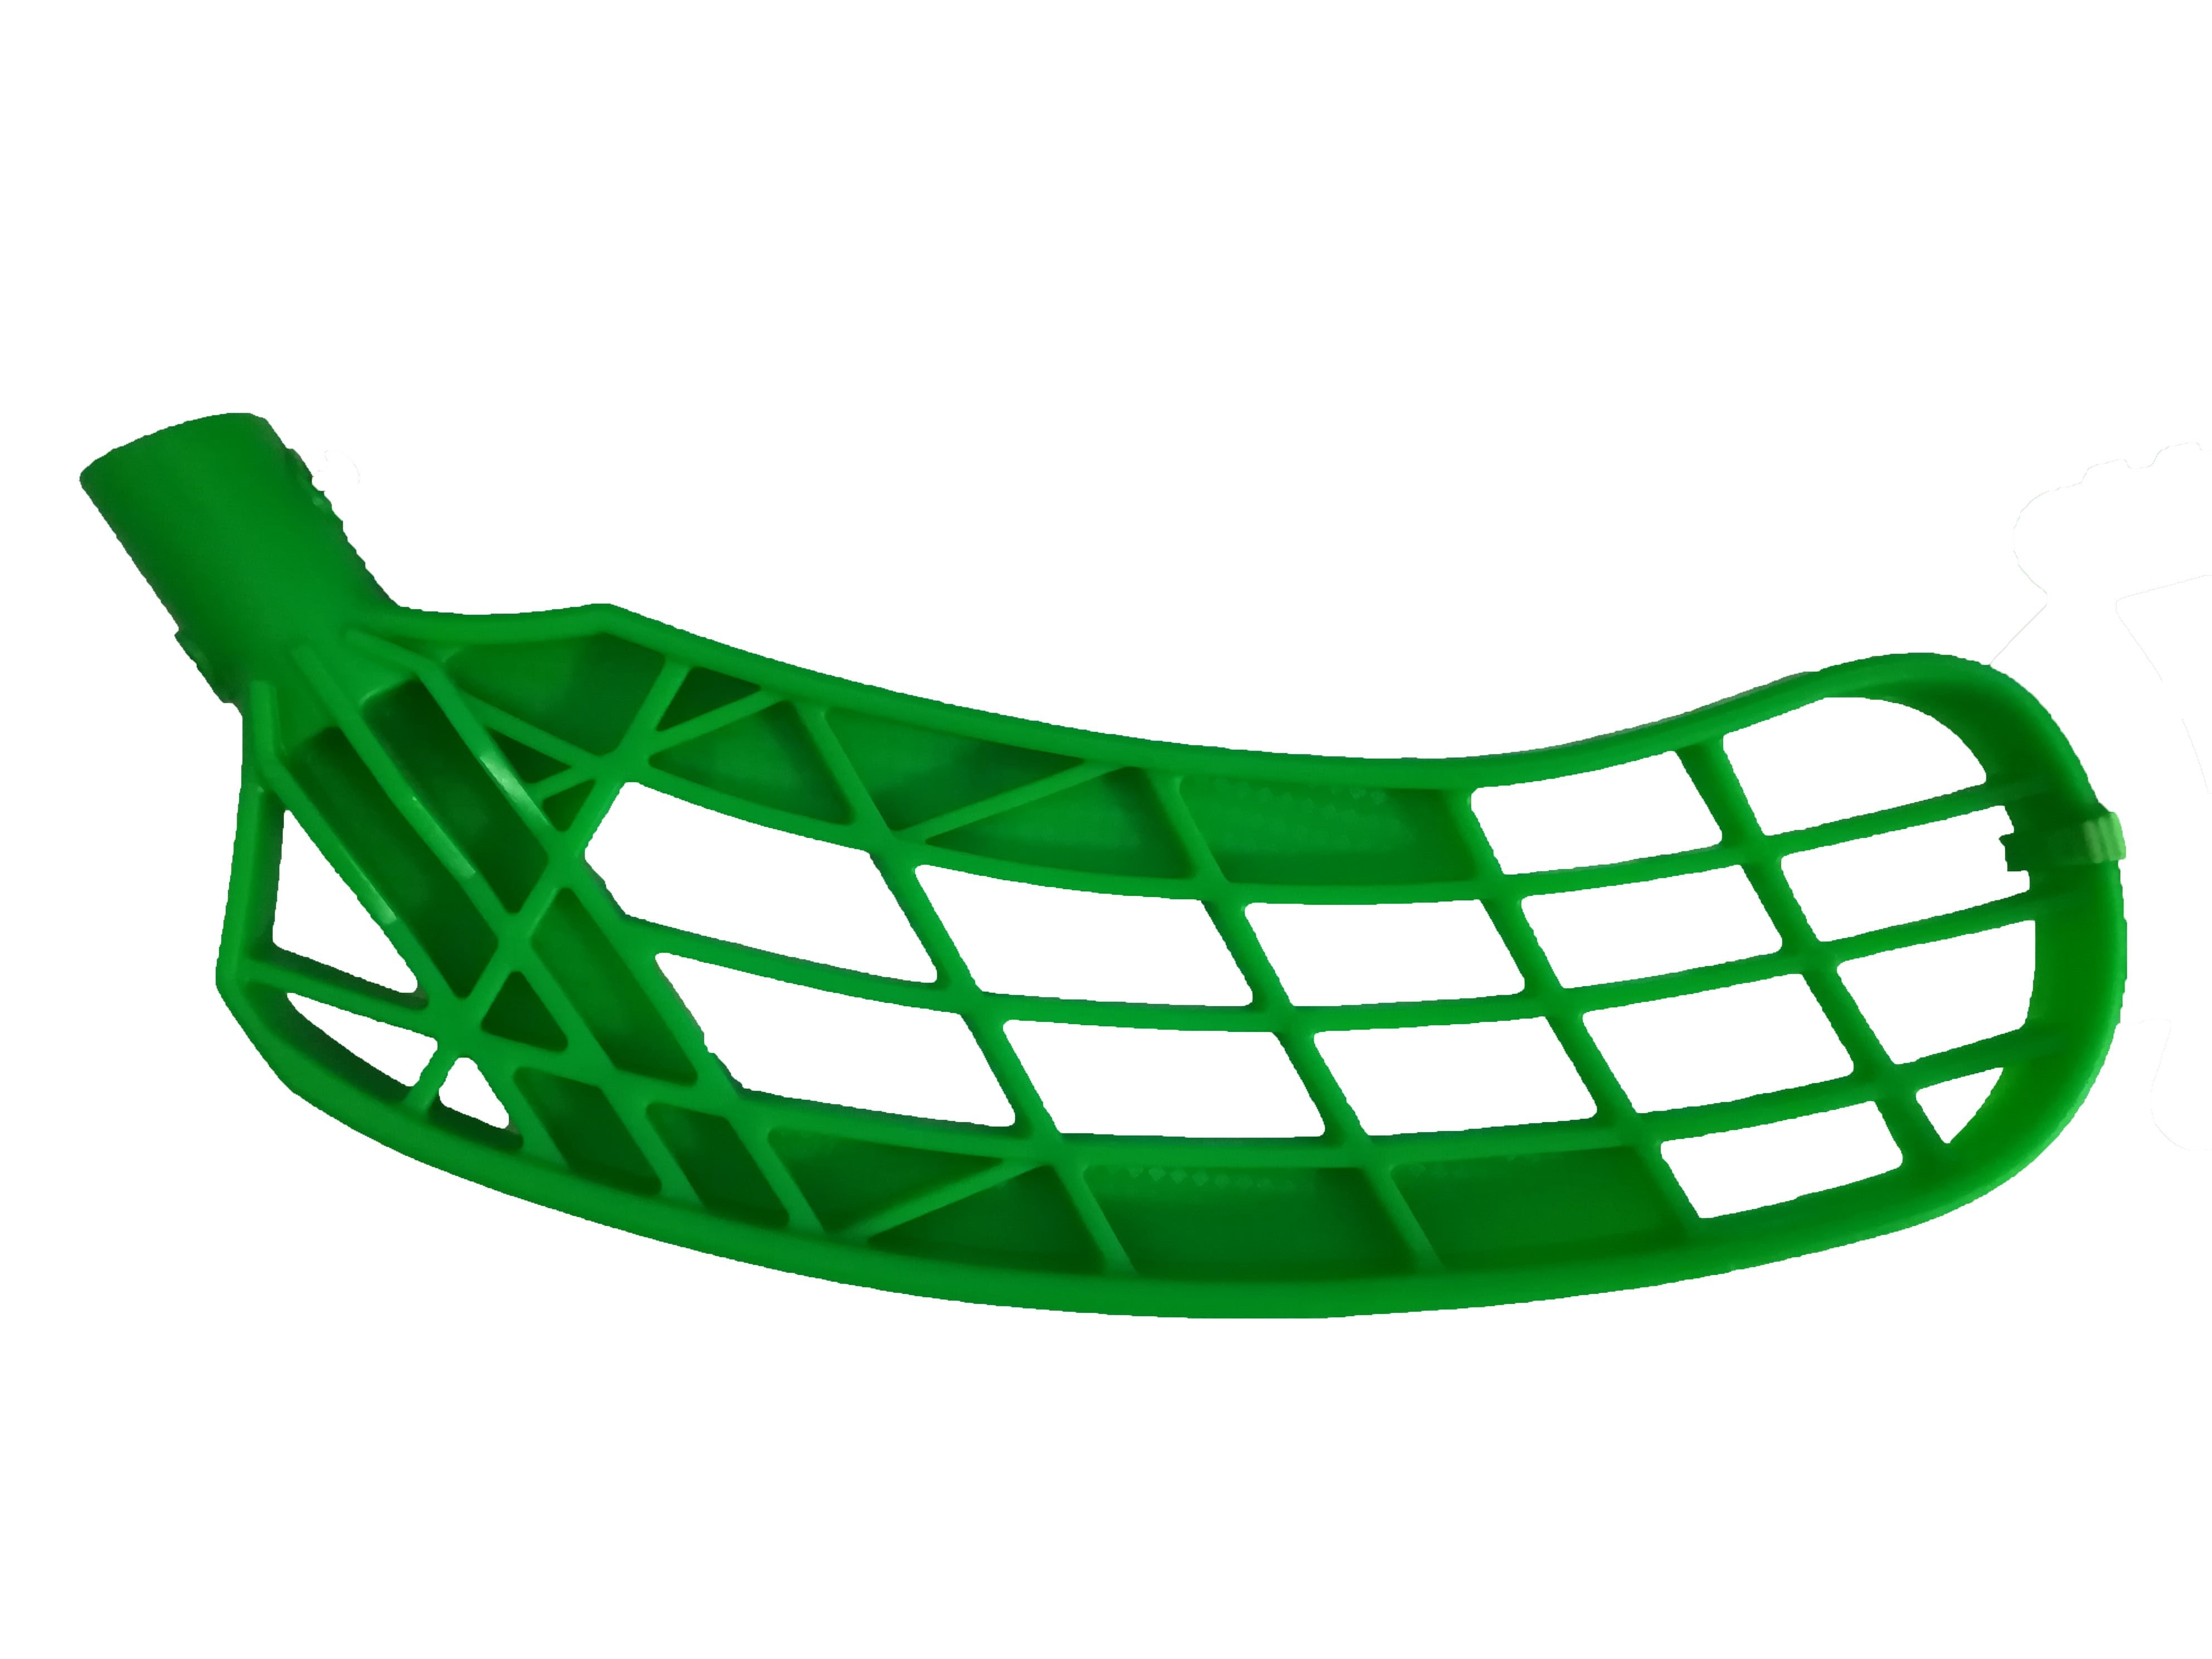 SALMING Q1 BioPower Floorball Replacement Blade